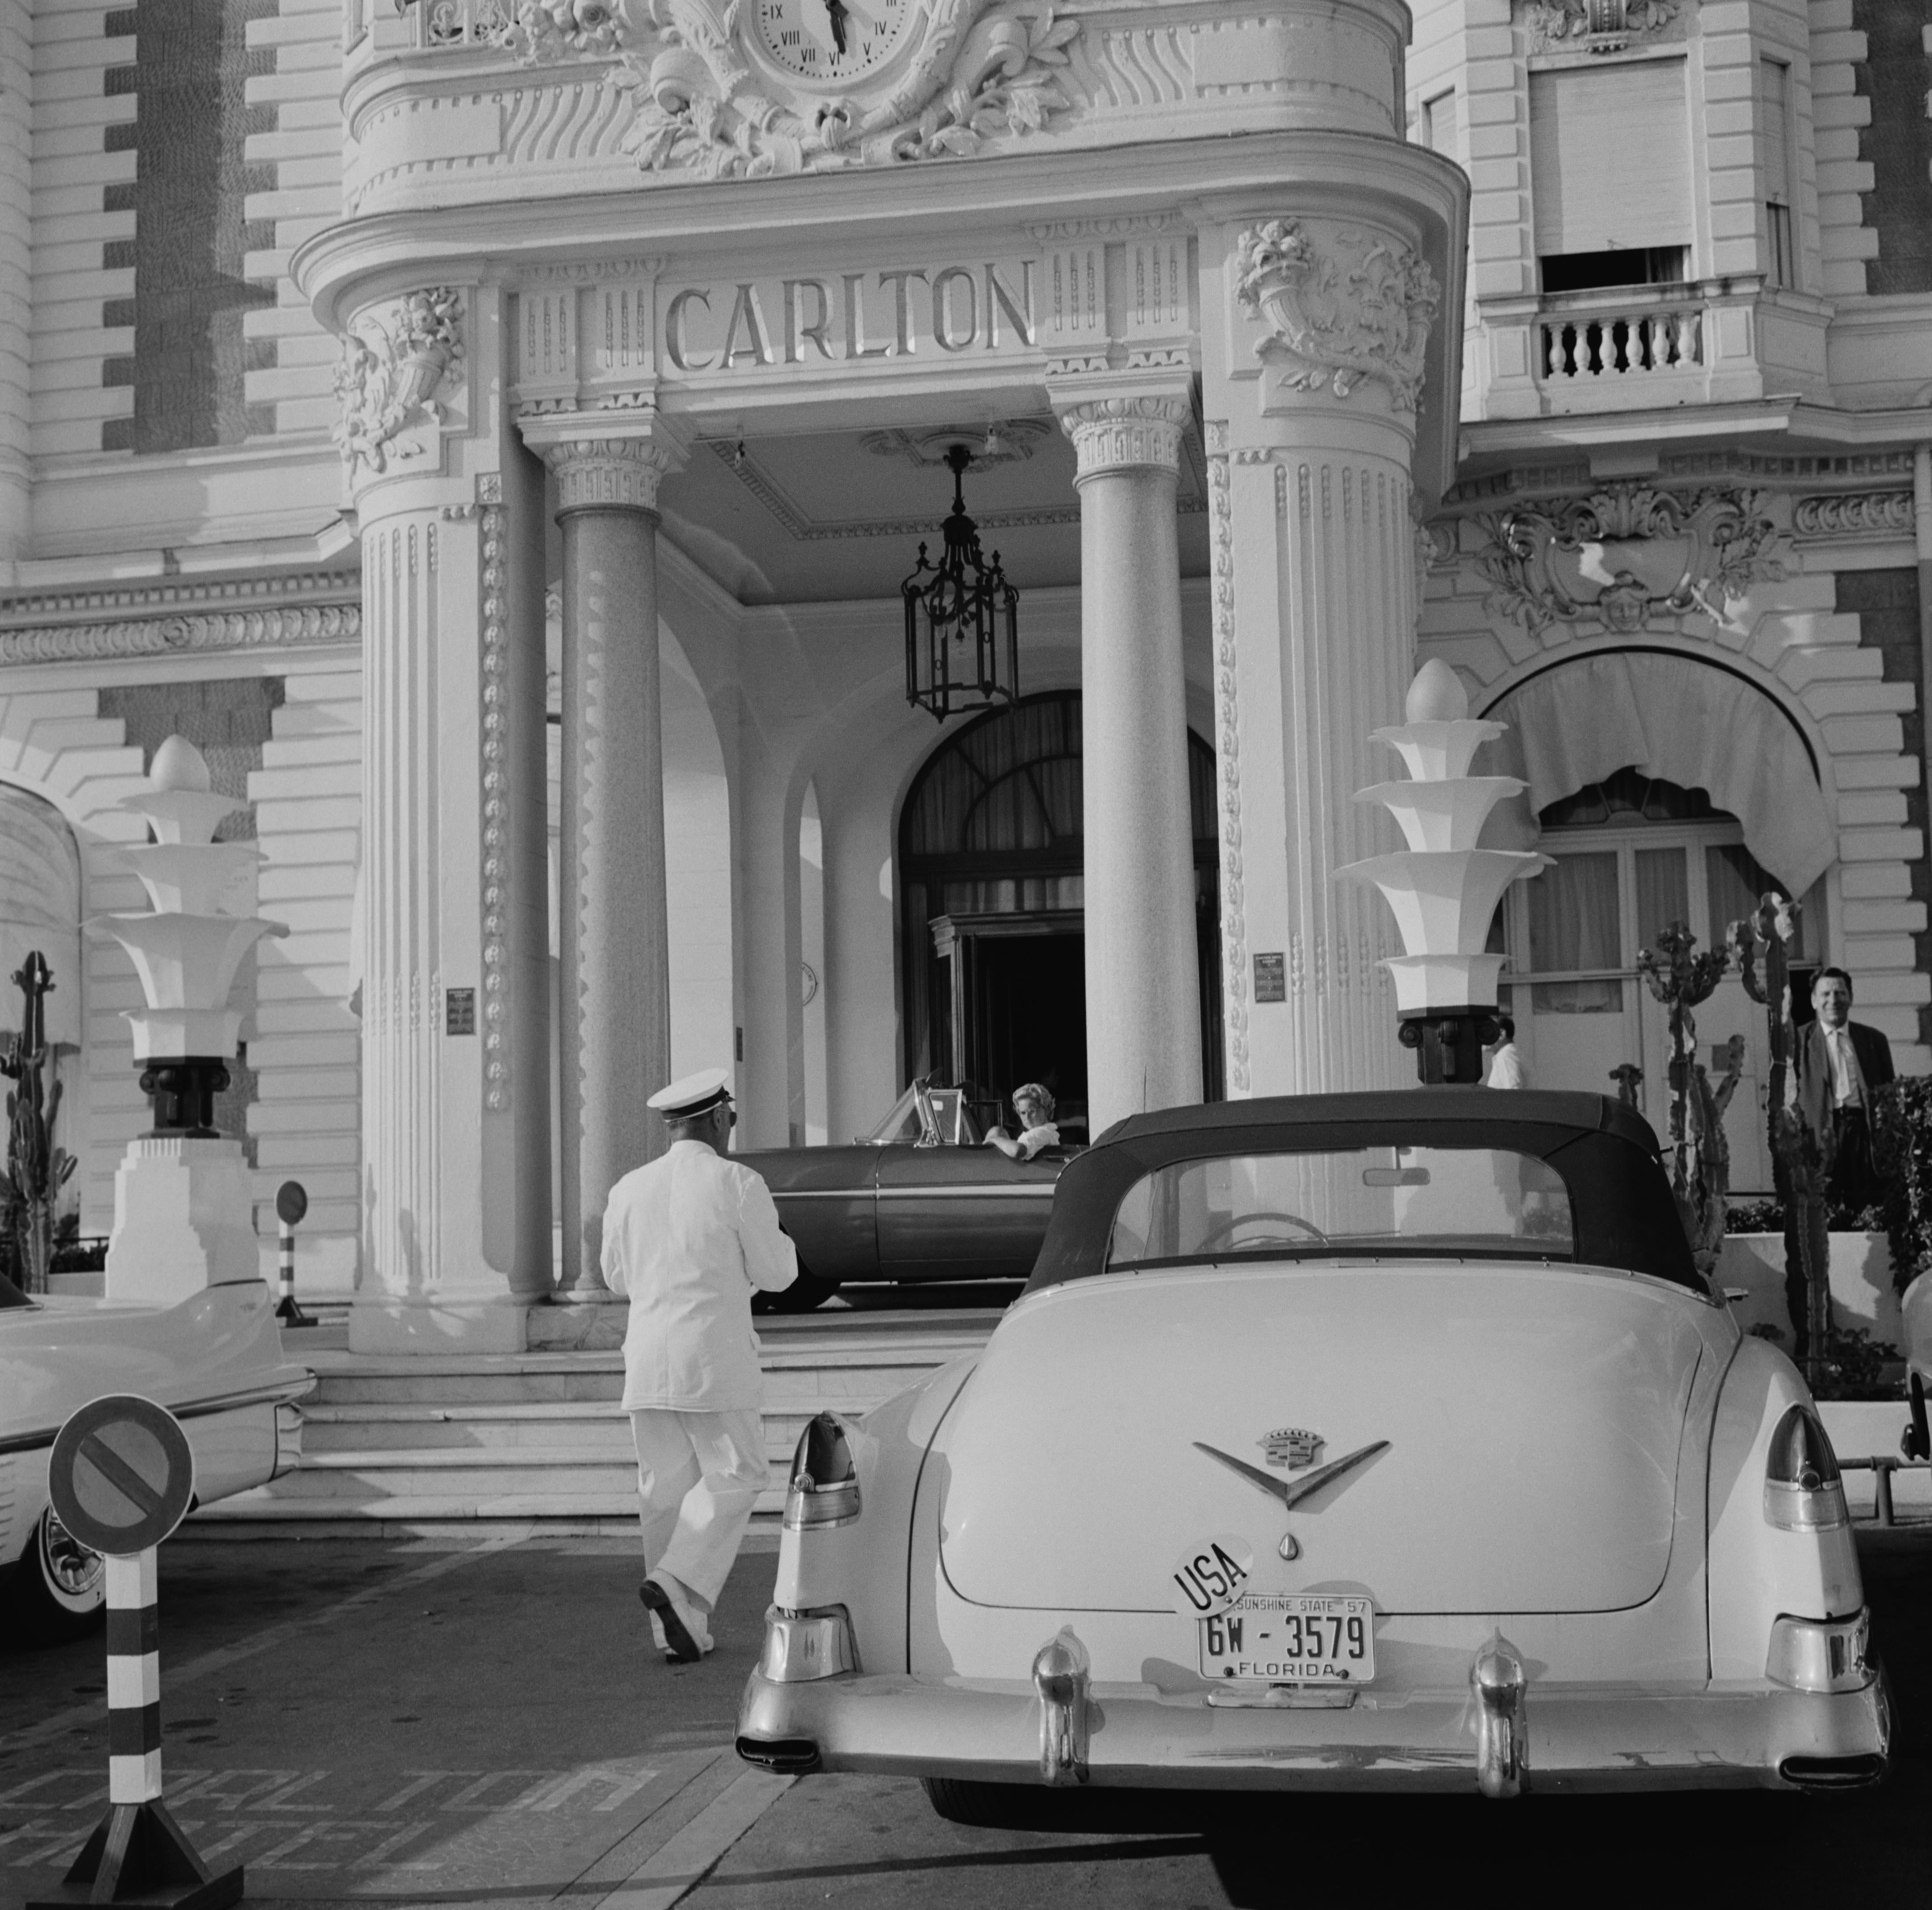 Slim Aarons Black and White Photograph - The Carlton Hotel